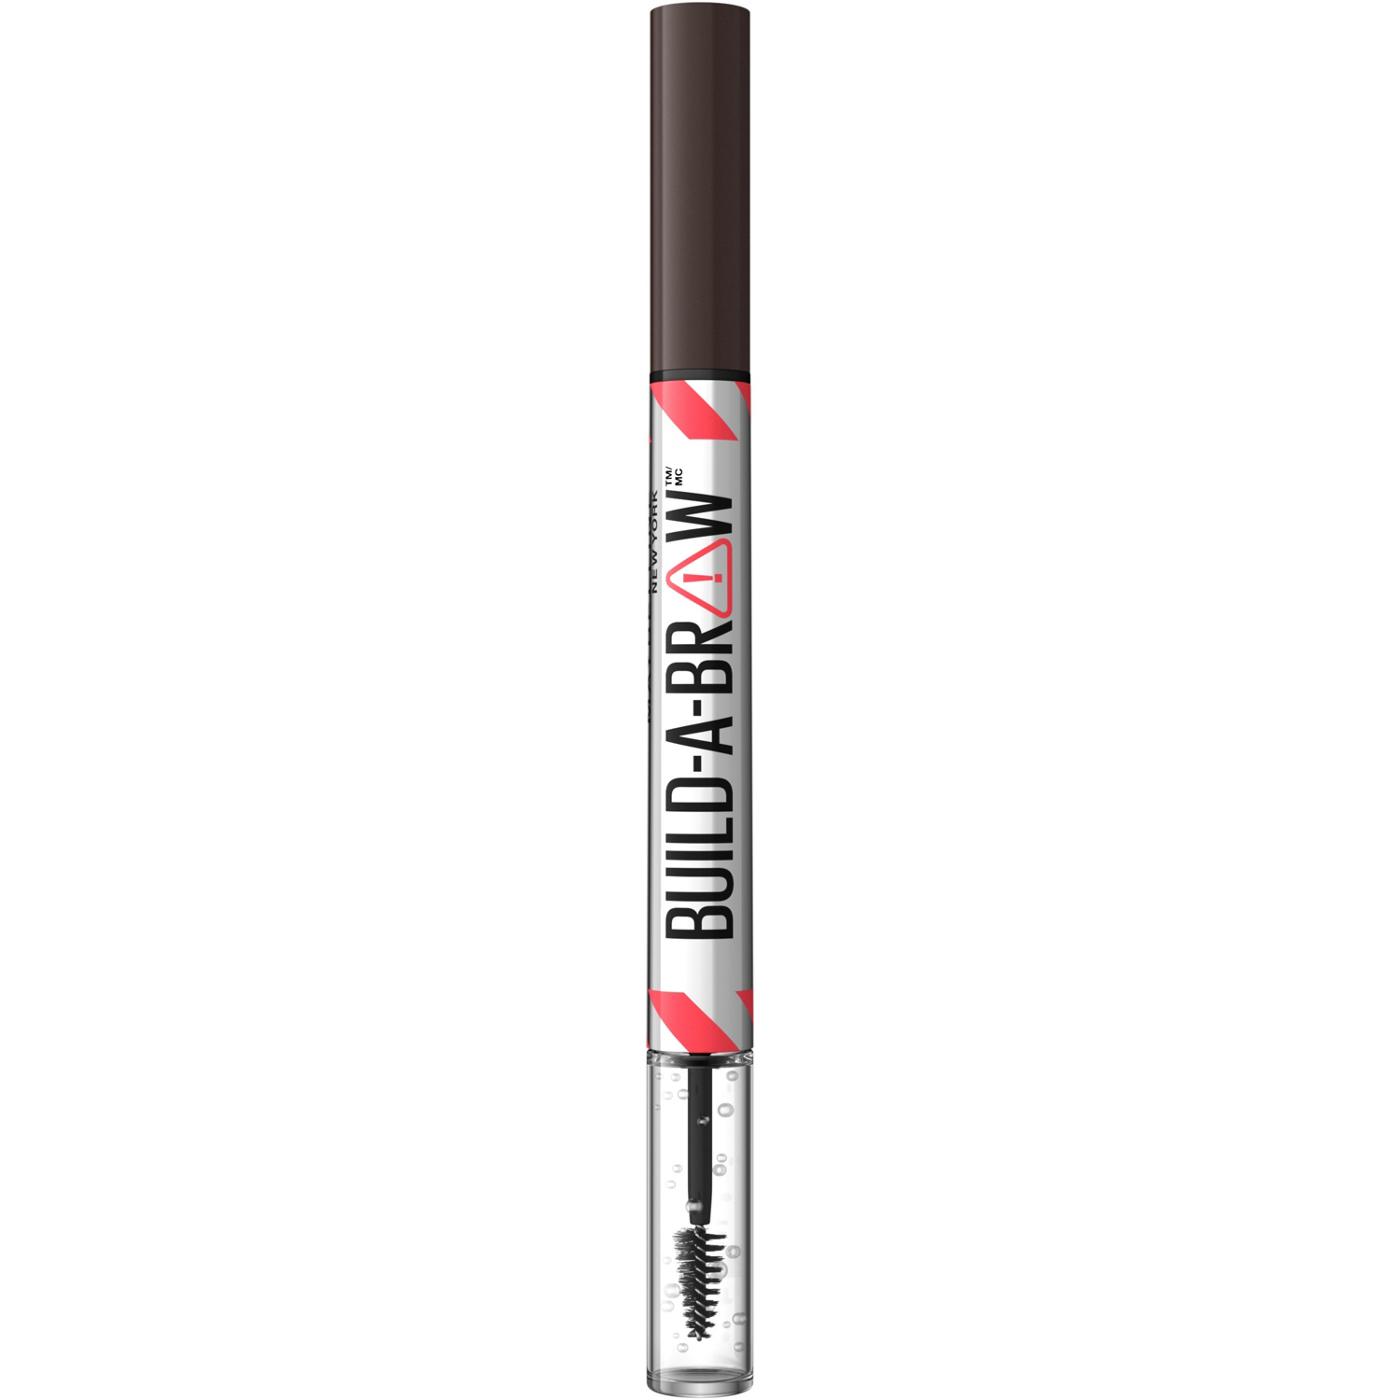 Maybelline Build A Brow 2 In 1 Brow Pen - Ash Brown; image 14 of 17